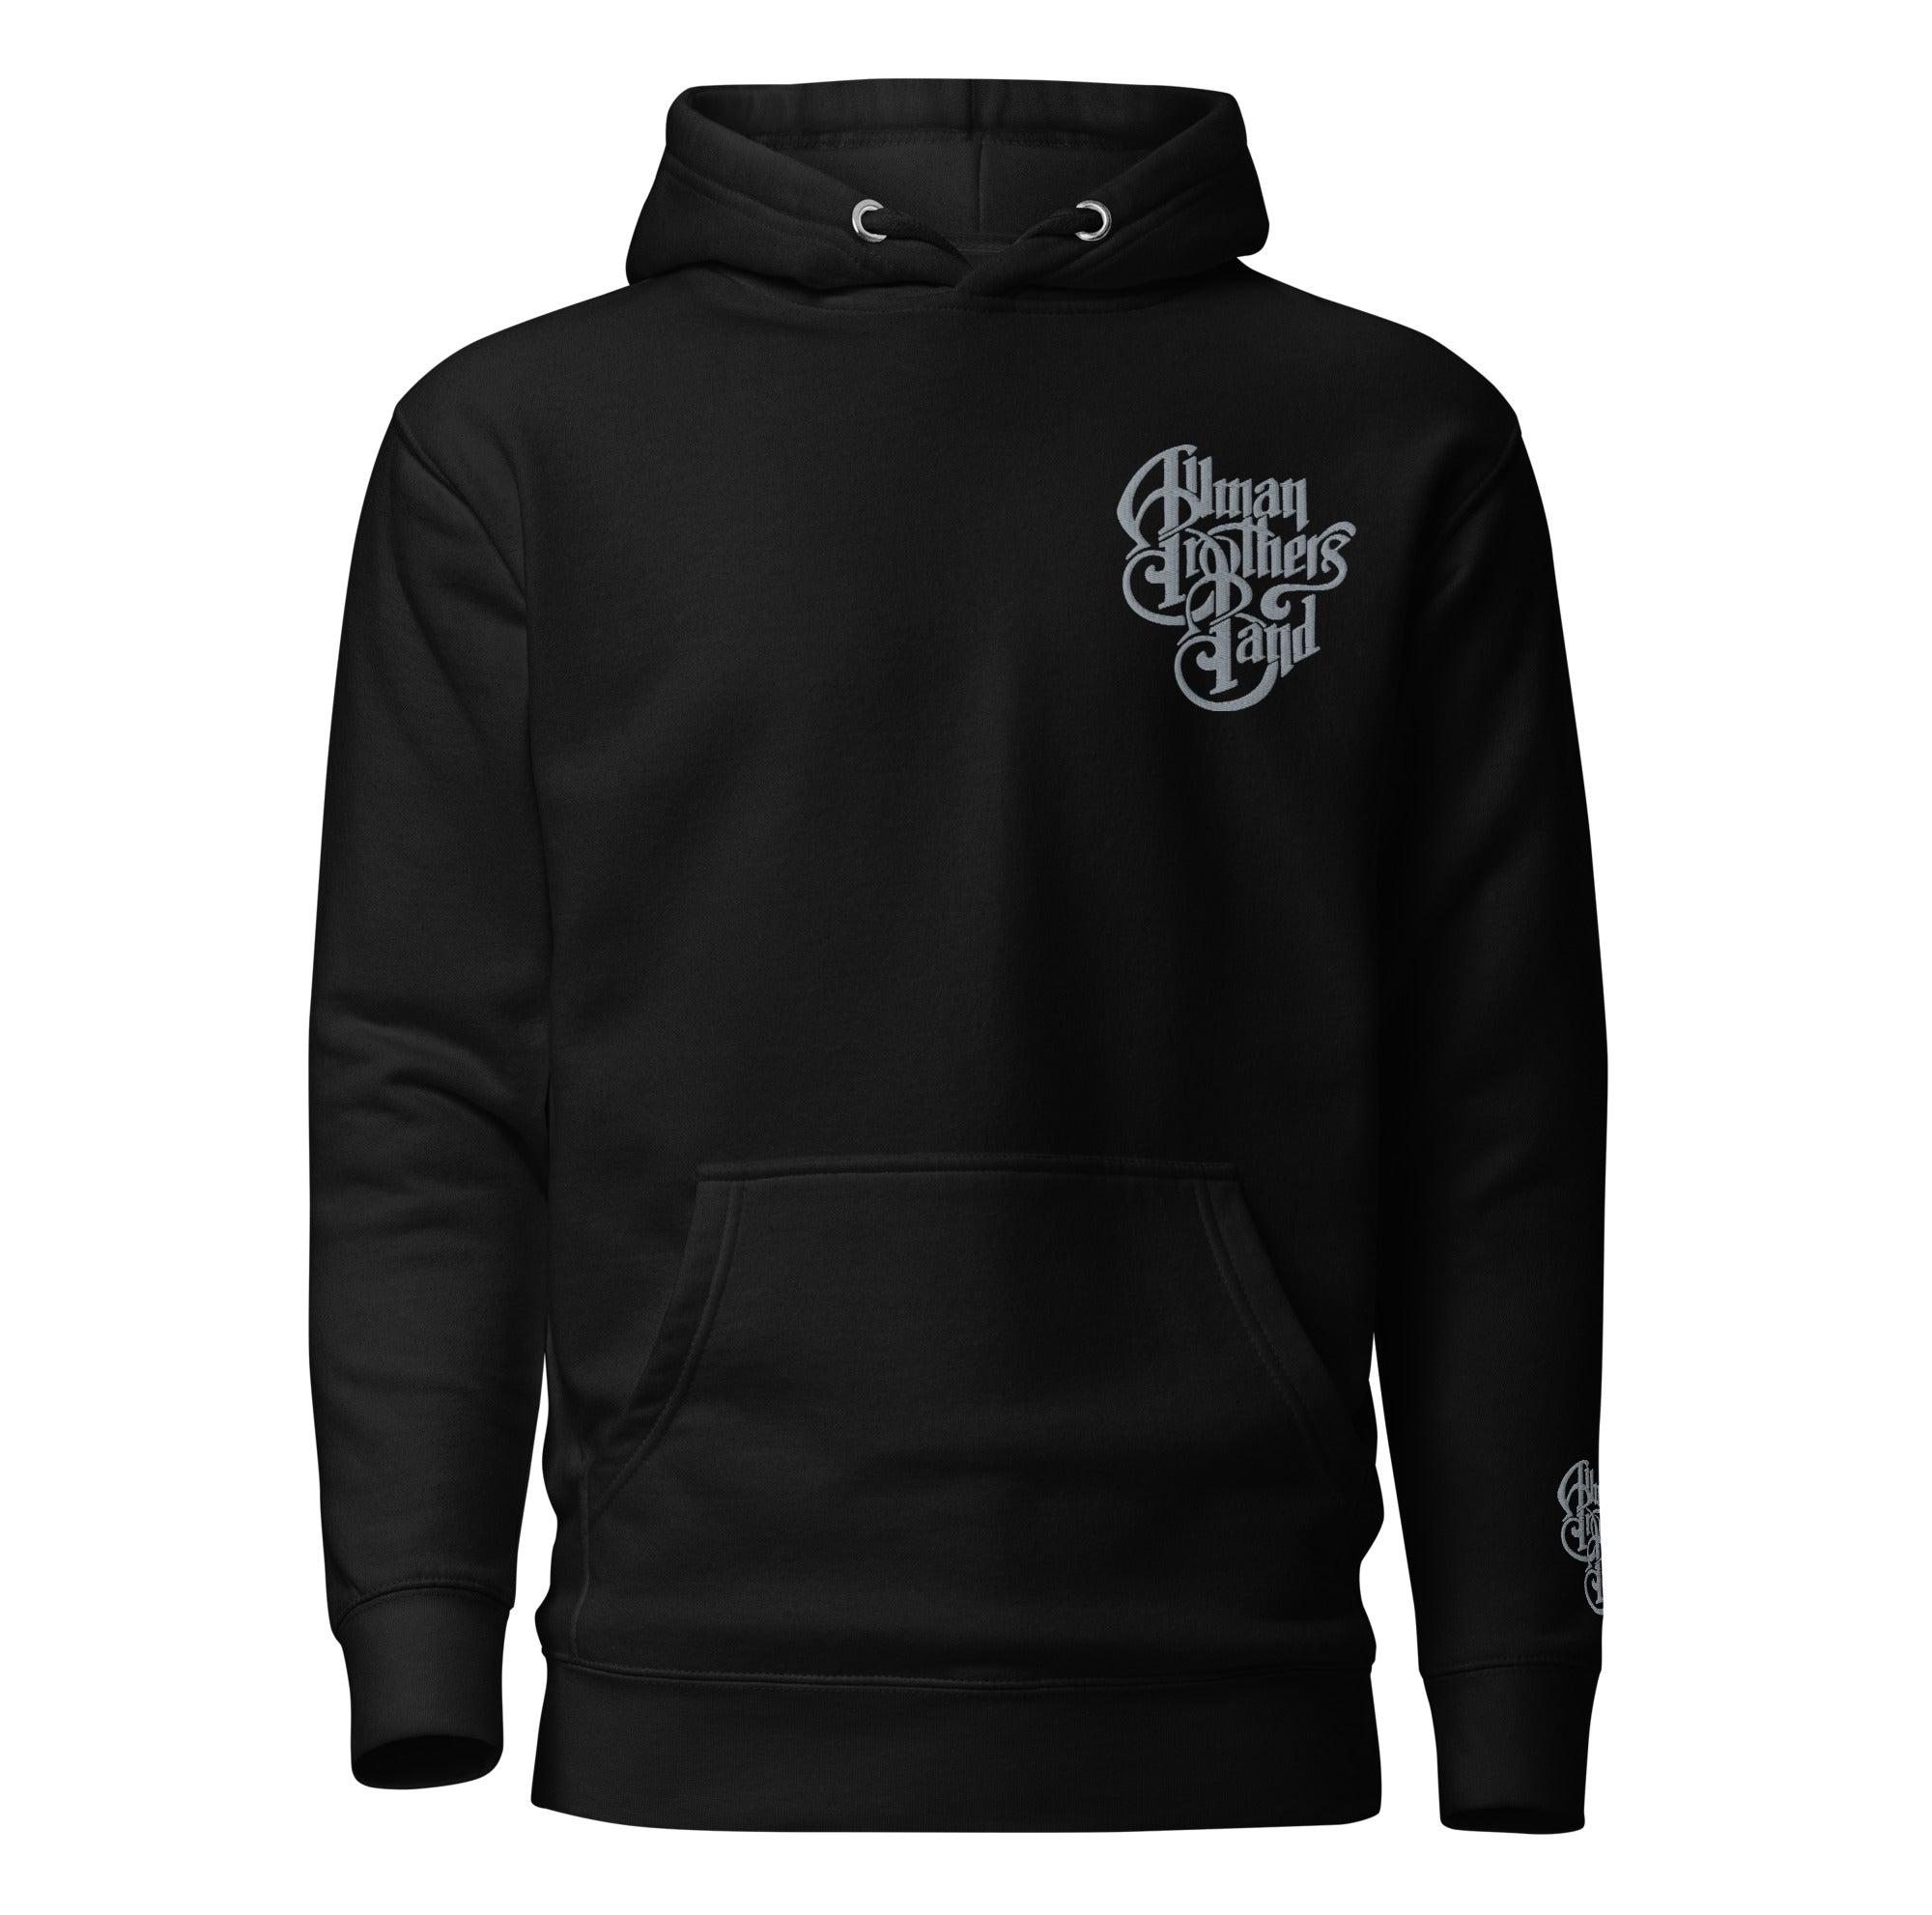 The Allman Brothers Band Classic Black Embroidered Hoodie - Section 119